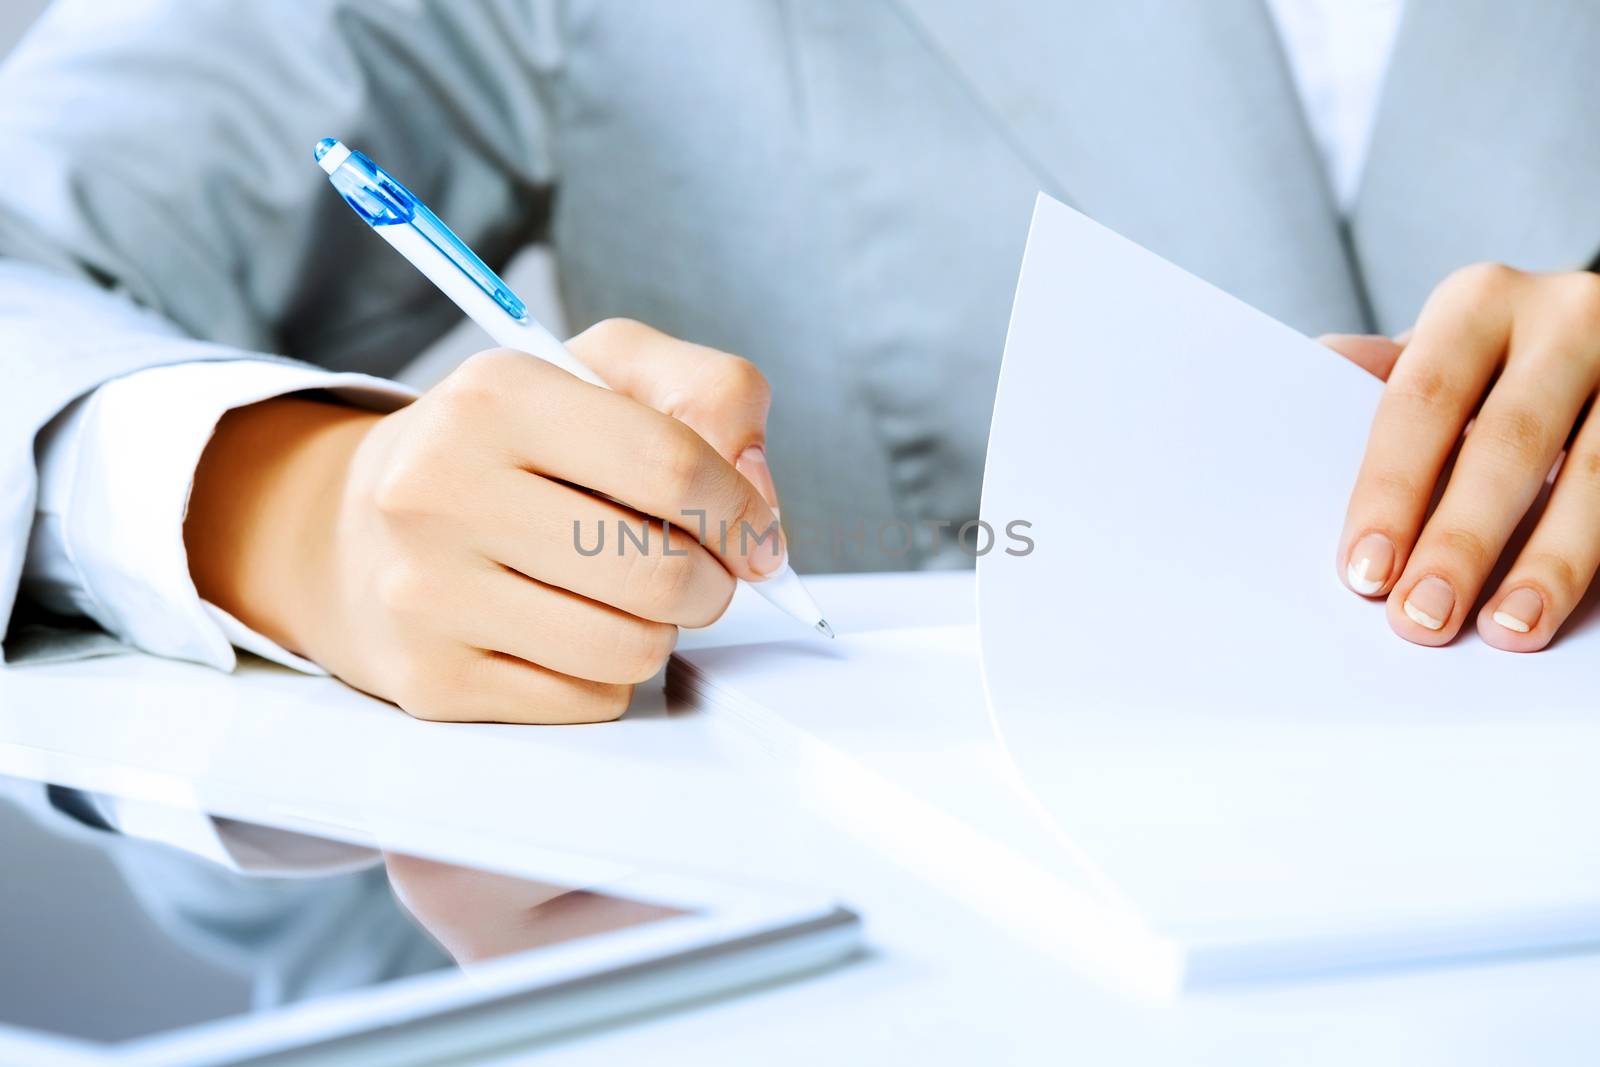 Close up image of businesswoman hands signing documents